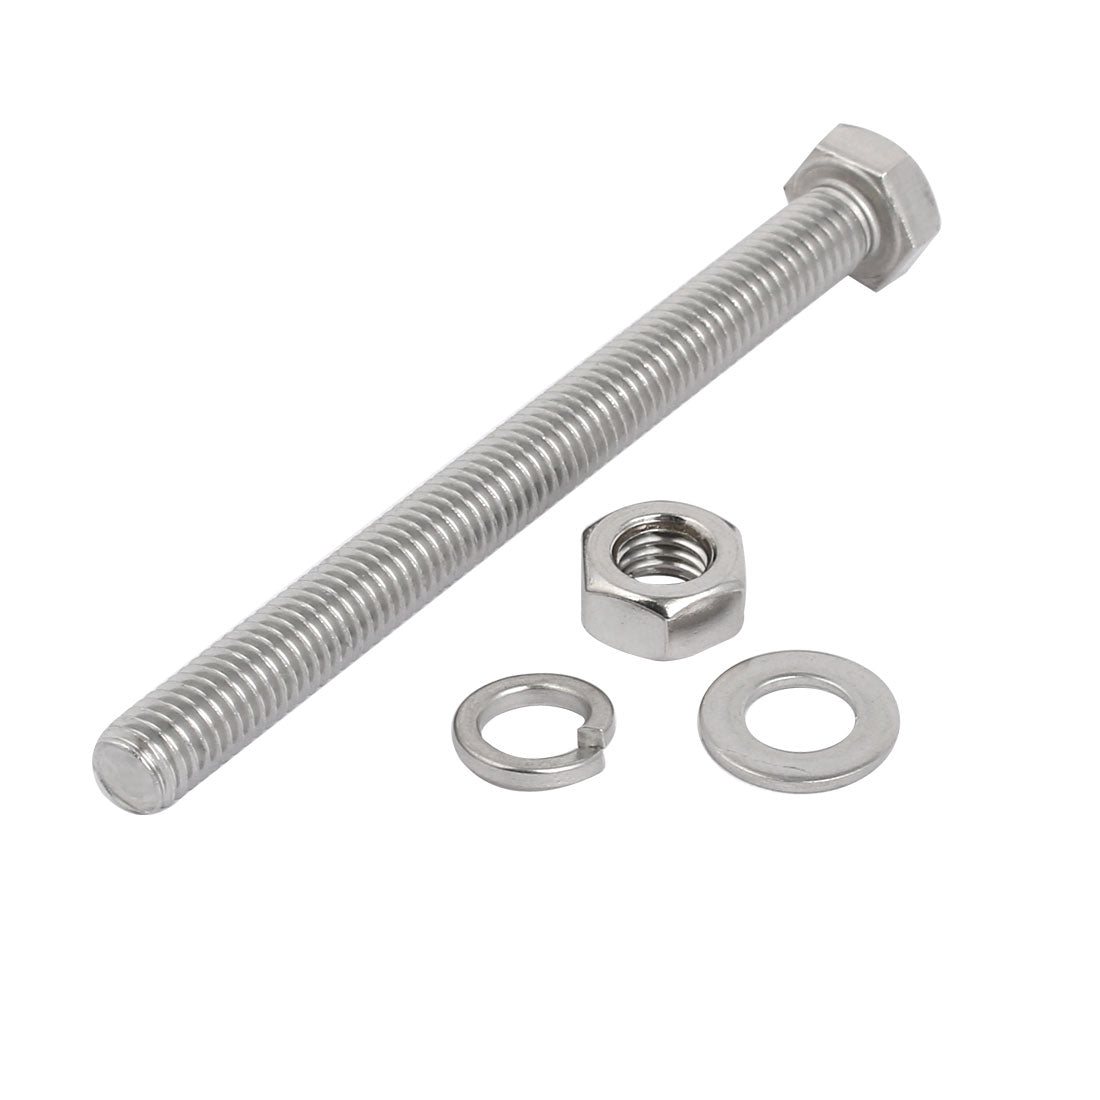 uxcell Uxcell 2 Set M8x110mm 304 Stainless Steel Hex Bolts w Nuts and Washers Assortment Kit